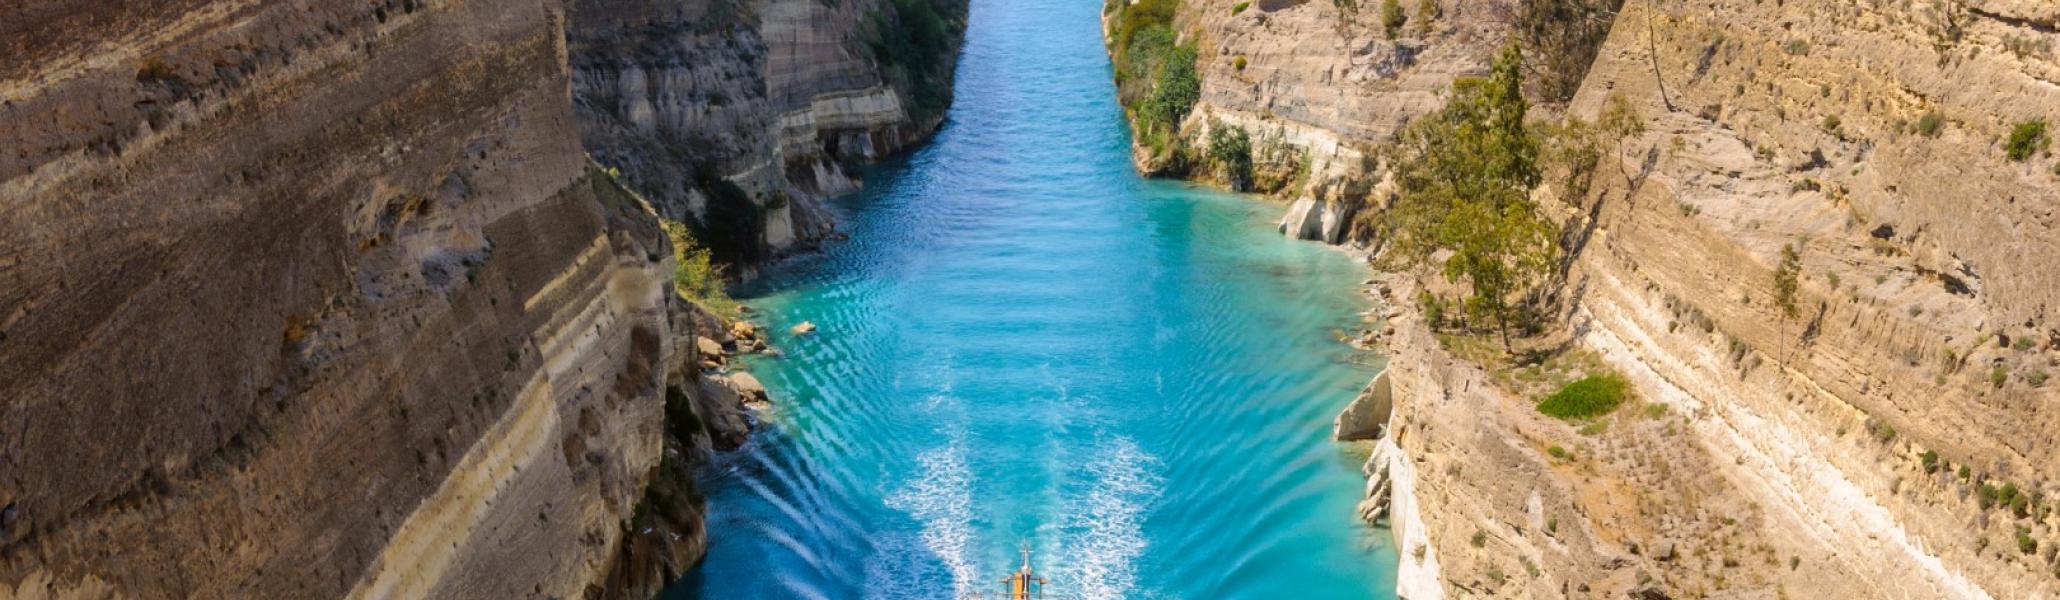 Ancient Corinth and Corinth Canal Half Day Private Tour